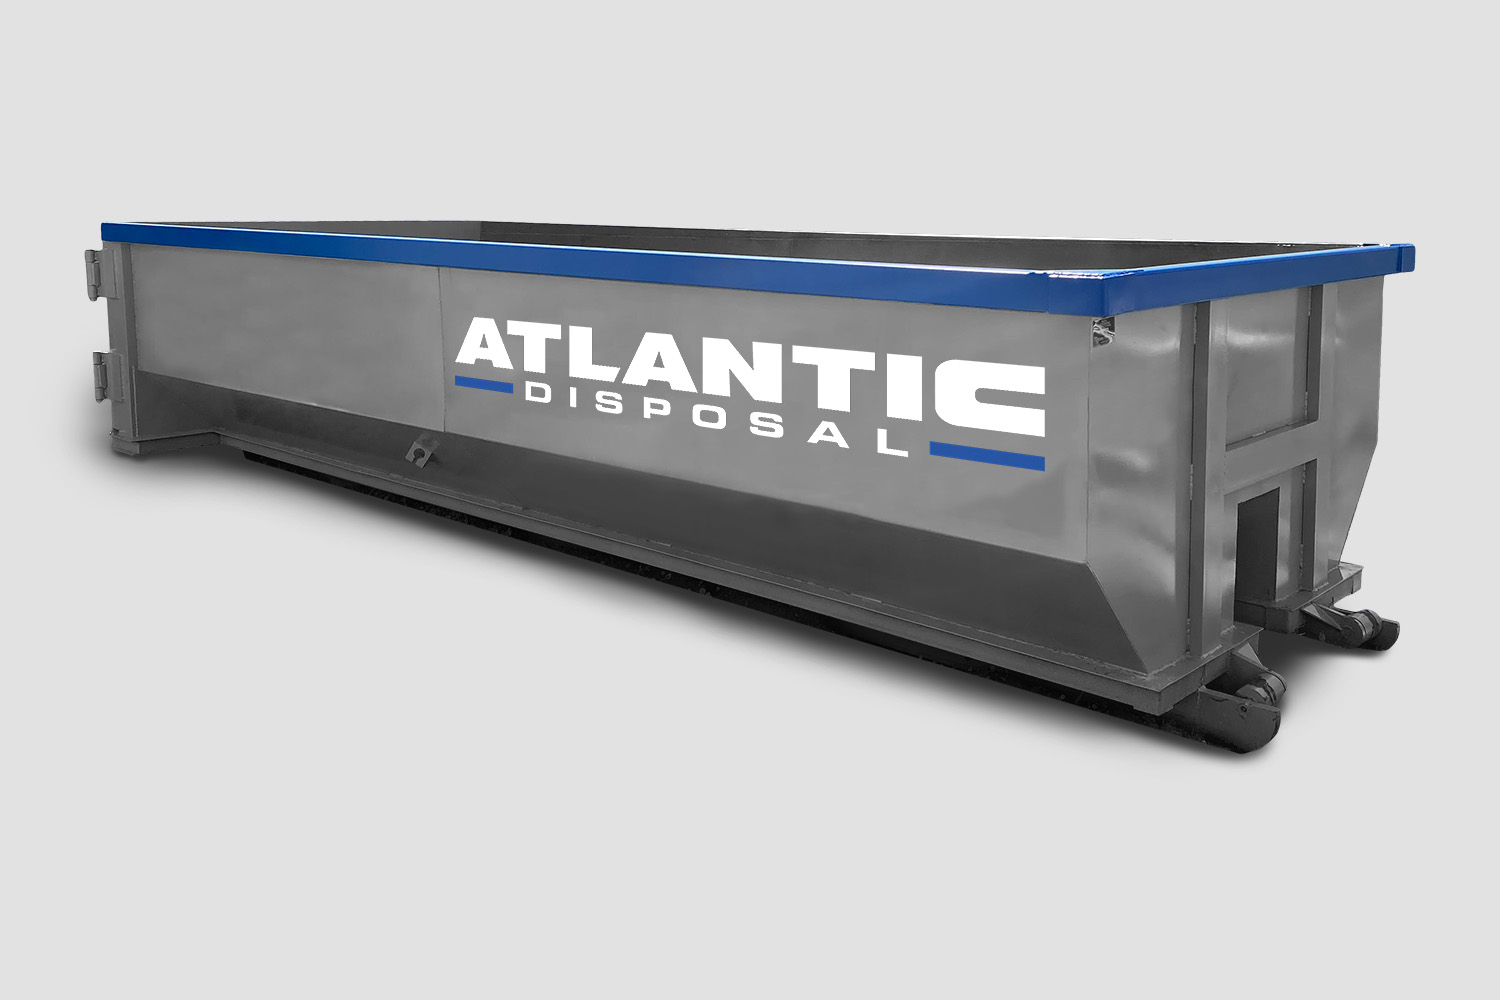 Atlantic Disposal dumpster rental services 20 yard roll off container - tub style waste bin St Augustine, FL